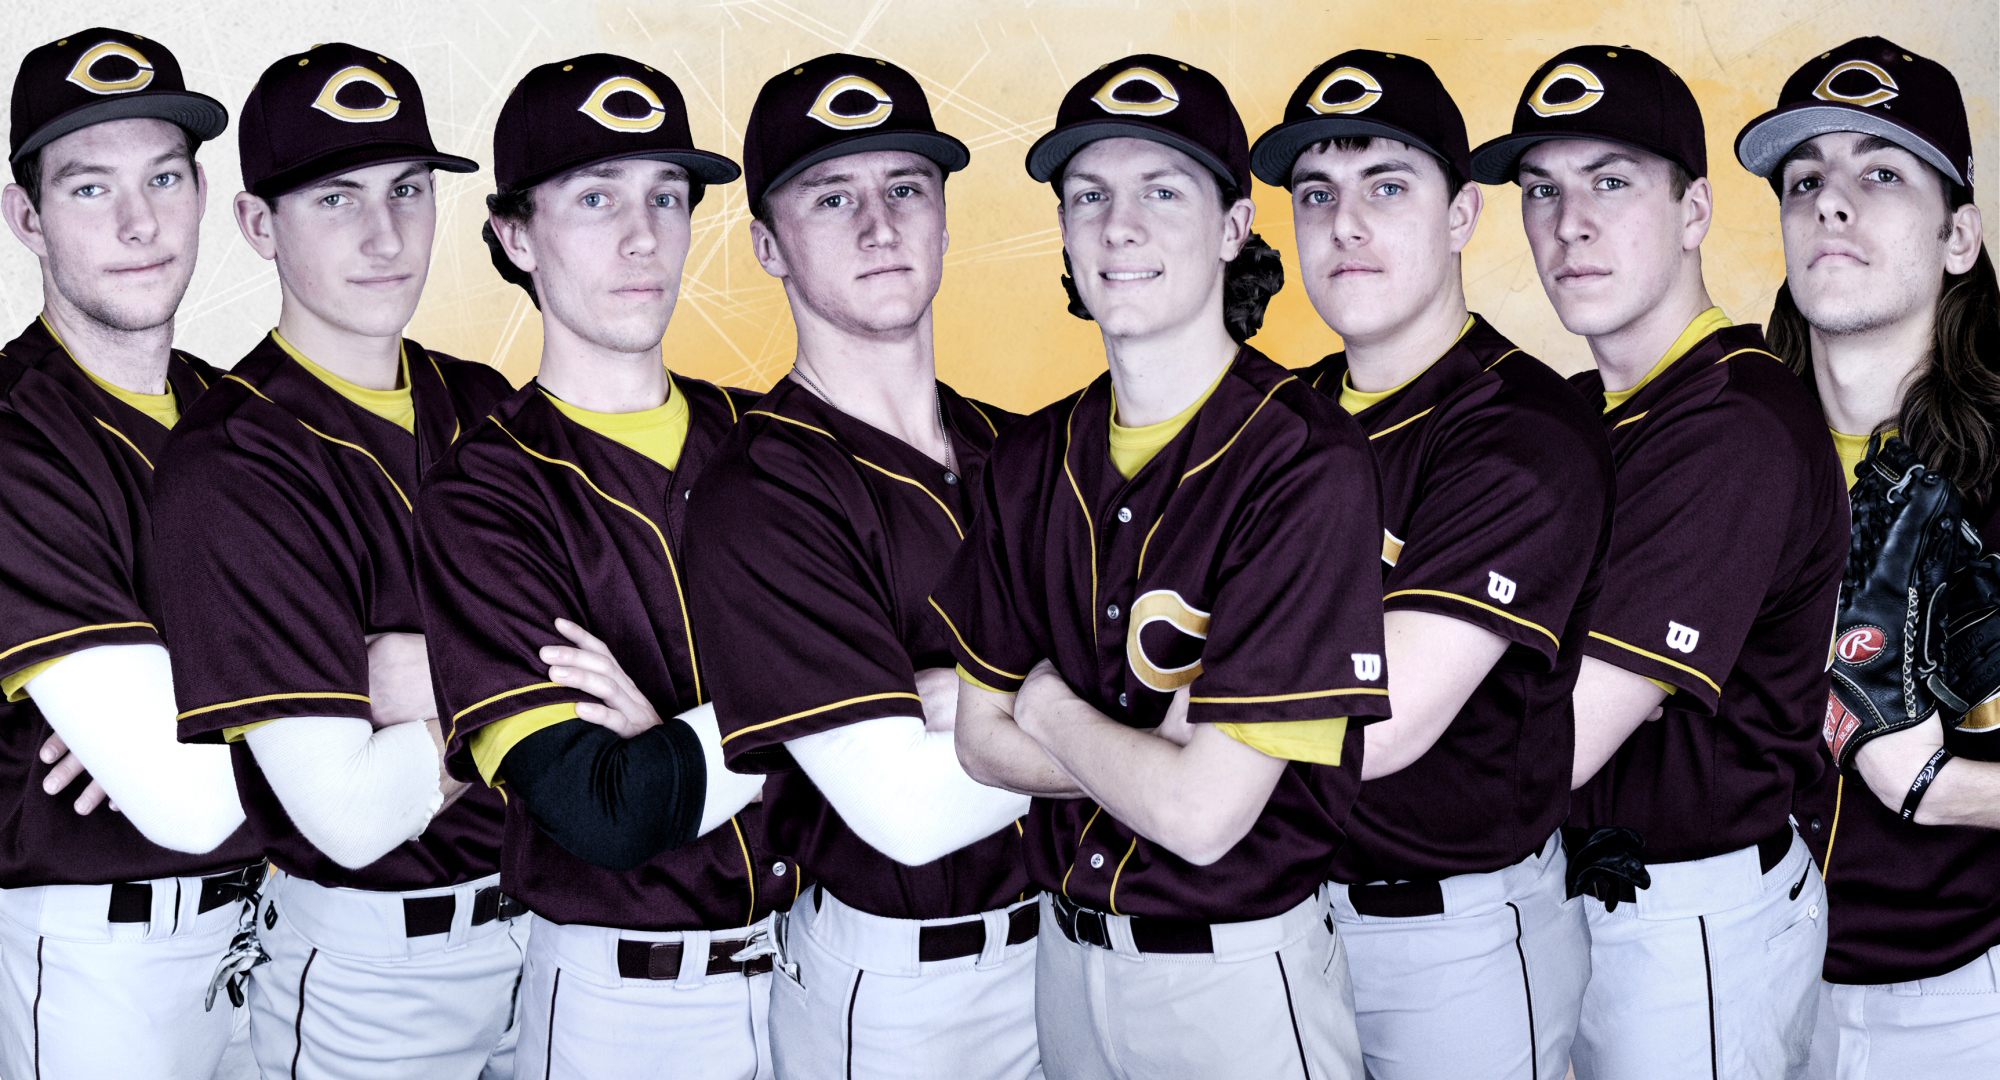 Concordia's eight seniors played their final two games at Bucky Burgau Field in the Cobbers' DH with Bethel. (L-R) Adam Nibaur, Brett Swanson, Nate Sillerud, Chad Johnson, Jack Hiedeman, Nate Leintz, Turner Storm, Zack Nelson.